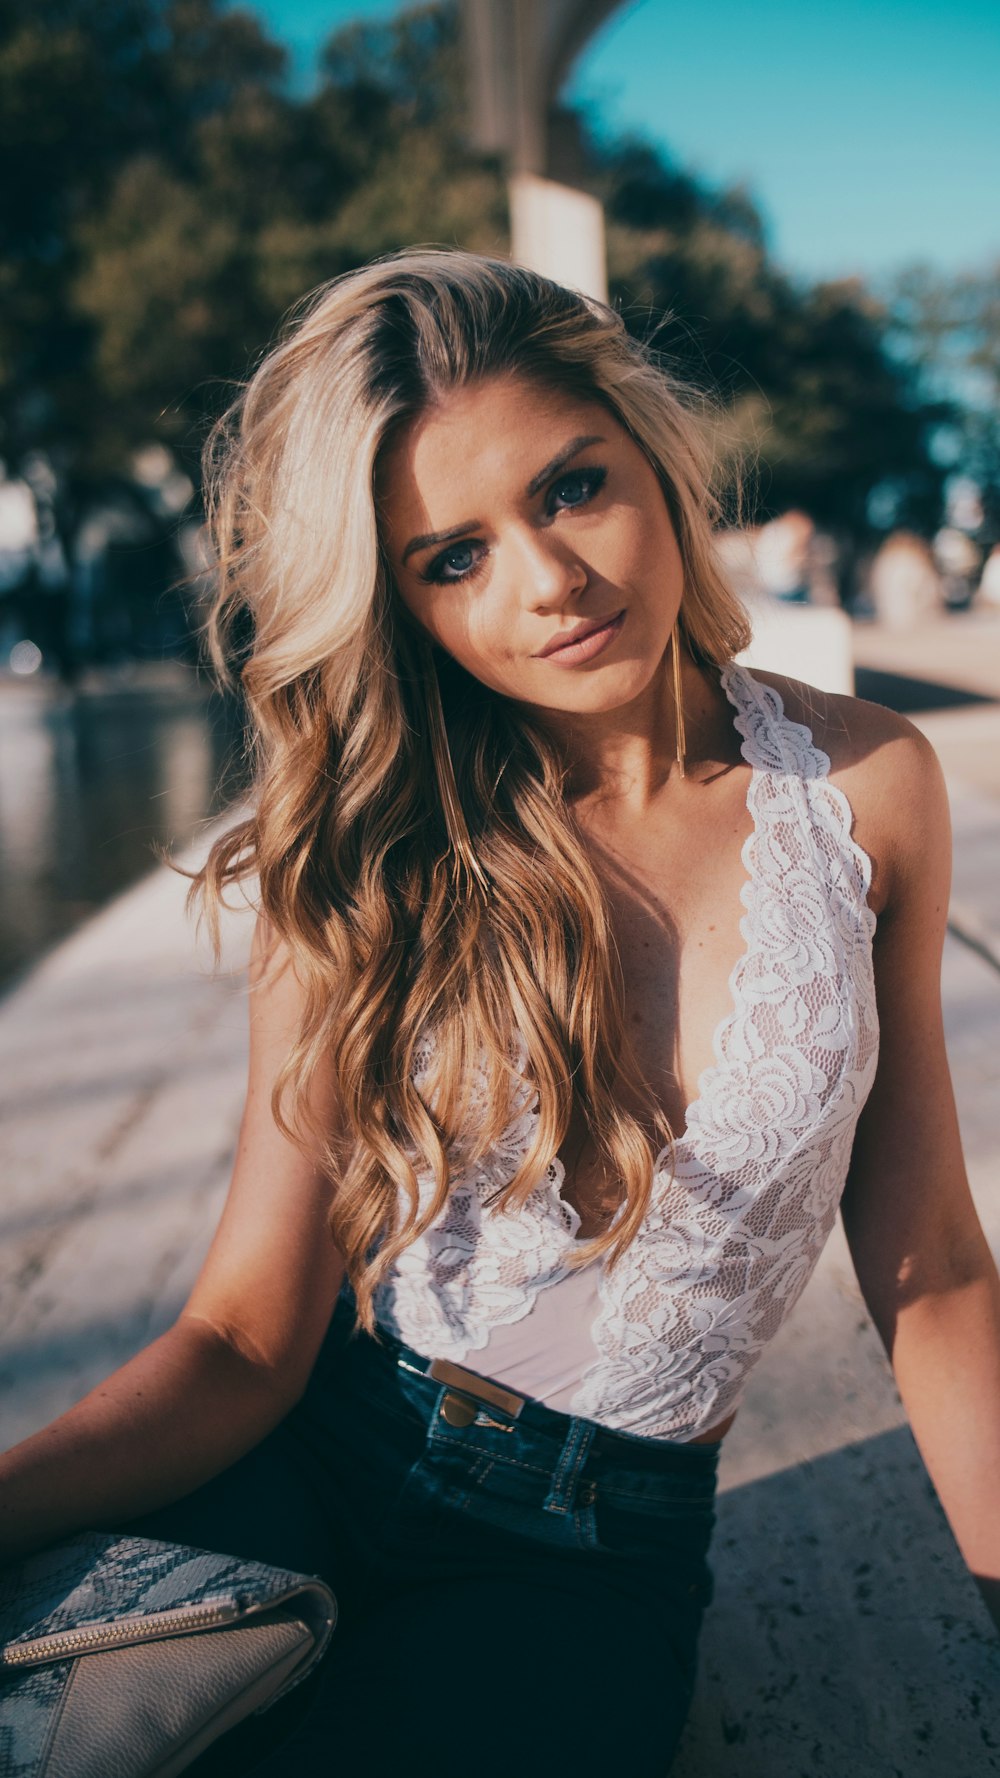 Woman wearing lace halter top and blue denim jeans photo – Free Blonde  Image on Unsplash